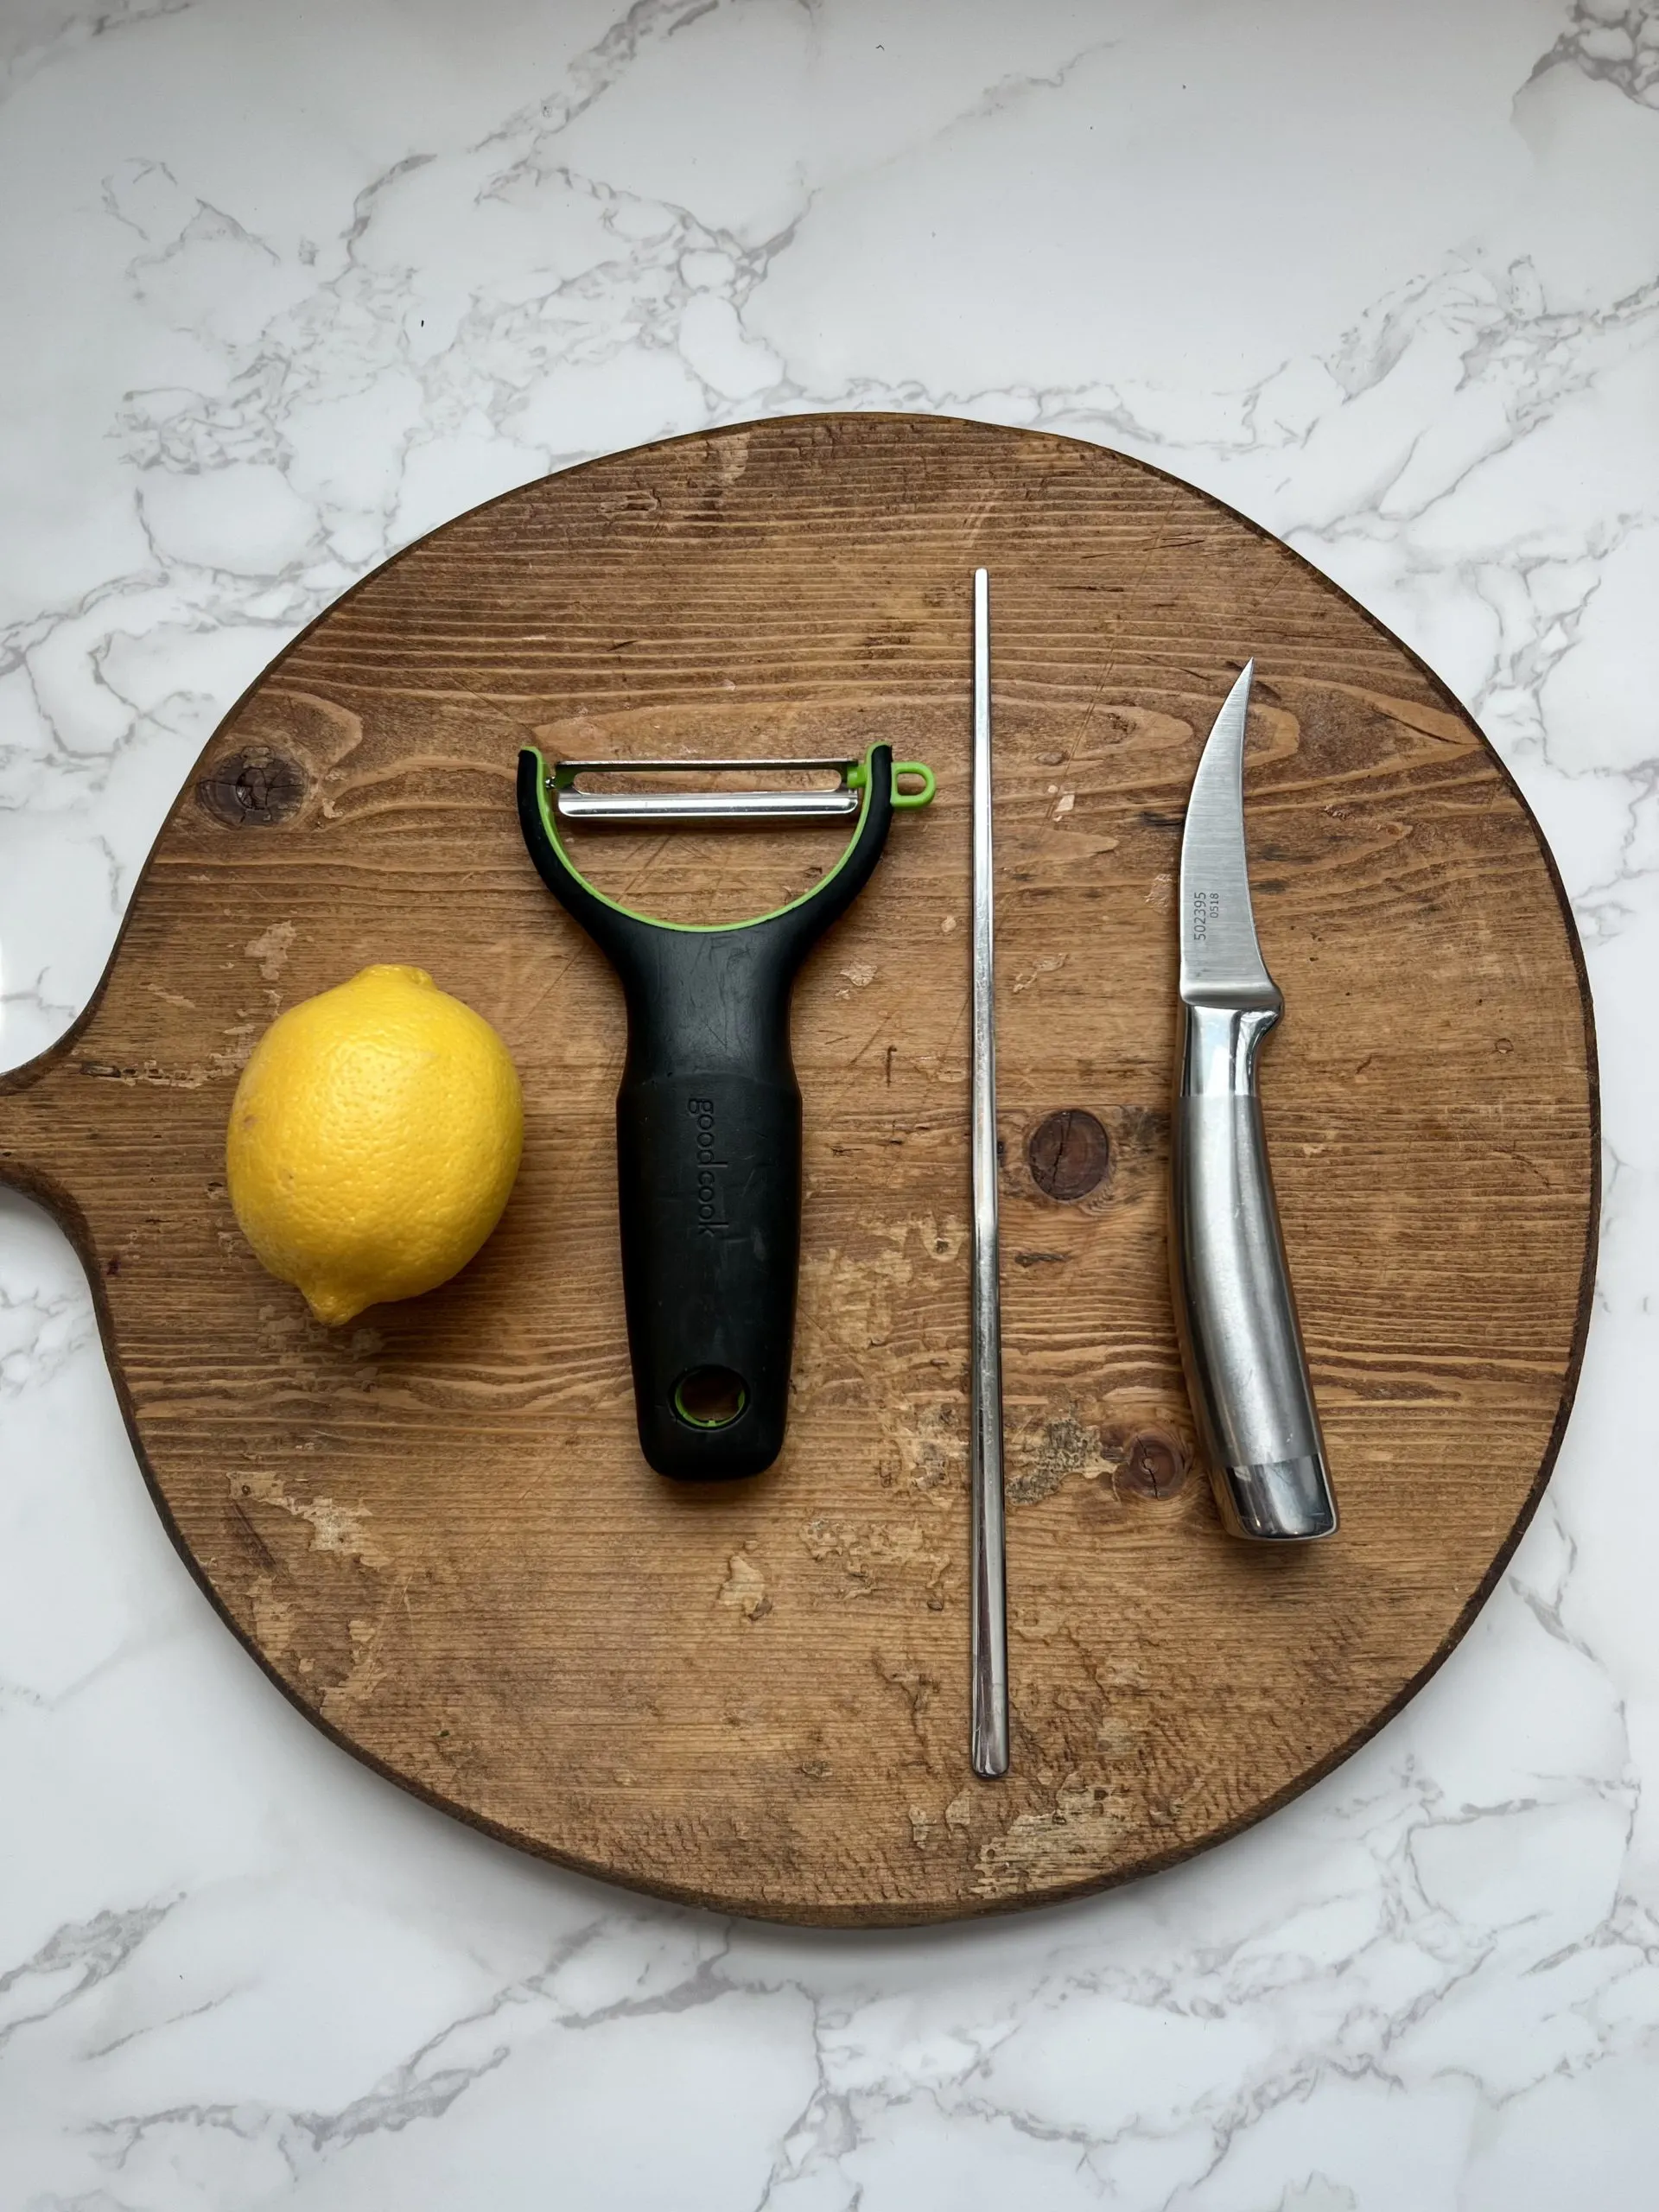 Tools needed to make a citrus twist garnish, including a ripe lemon, cutting board, vegetable peeler, chopstick, and knife.